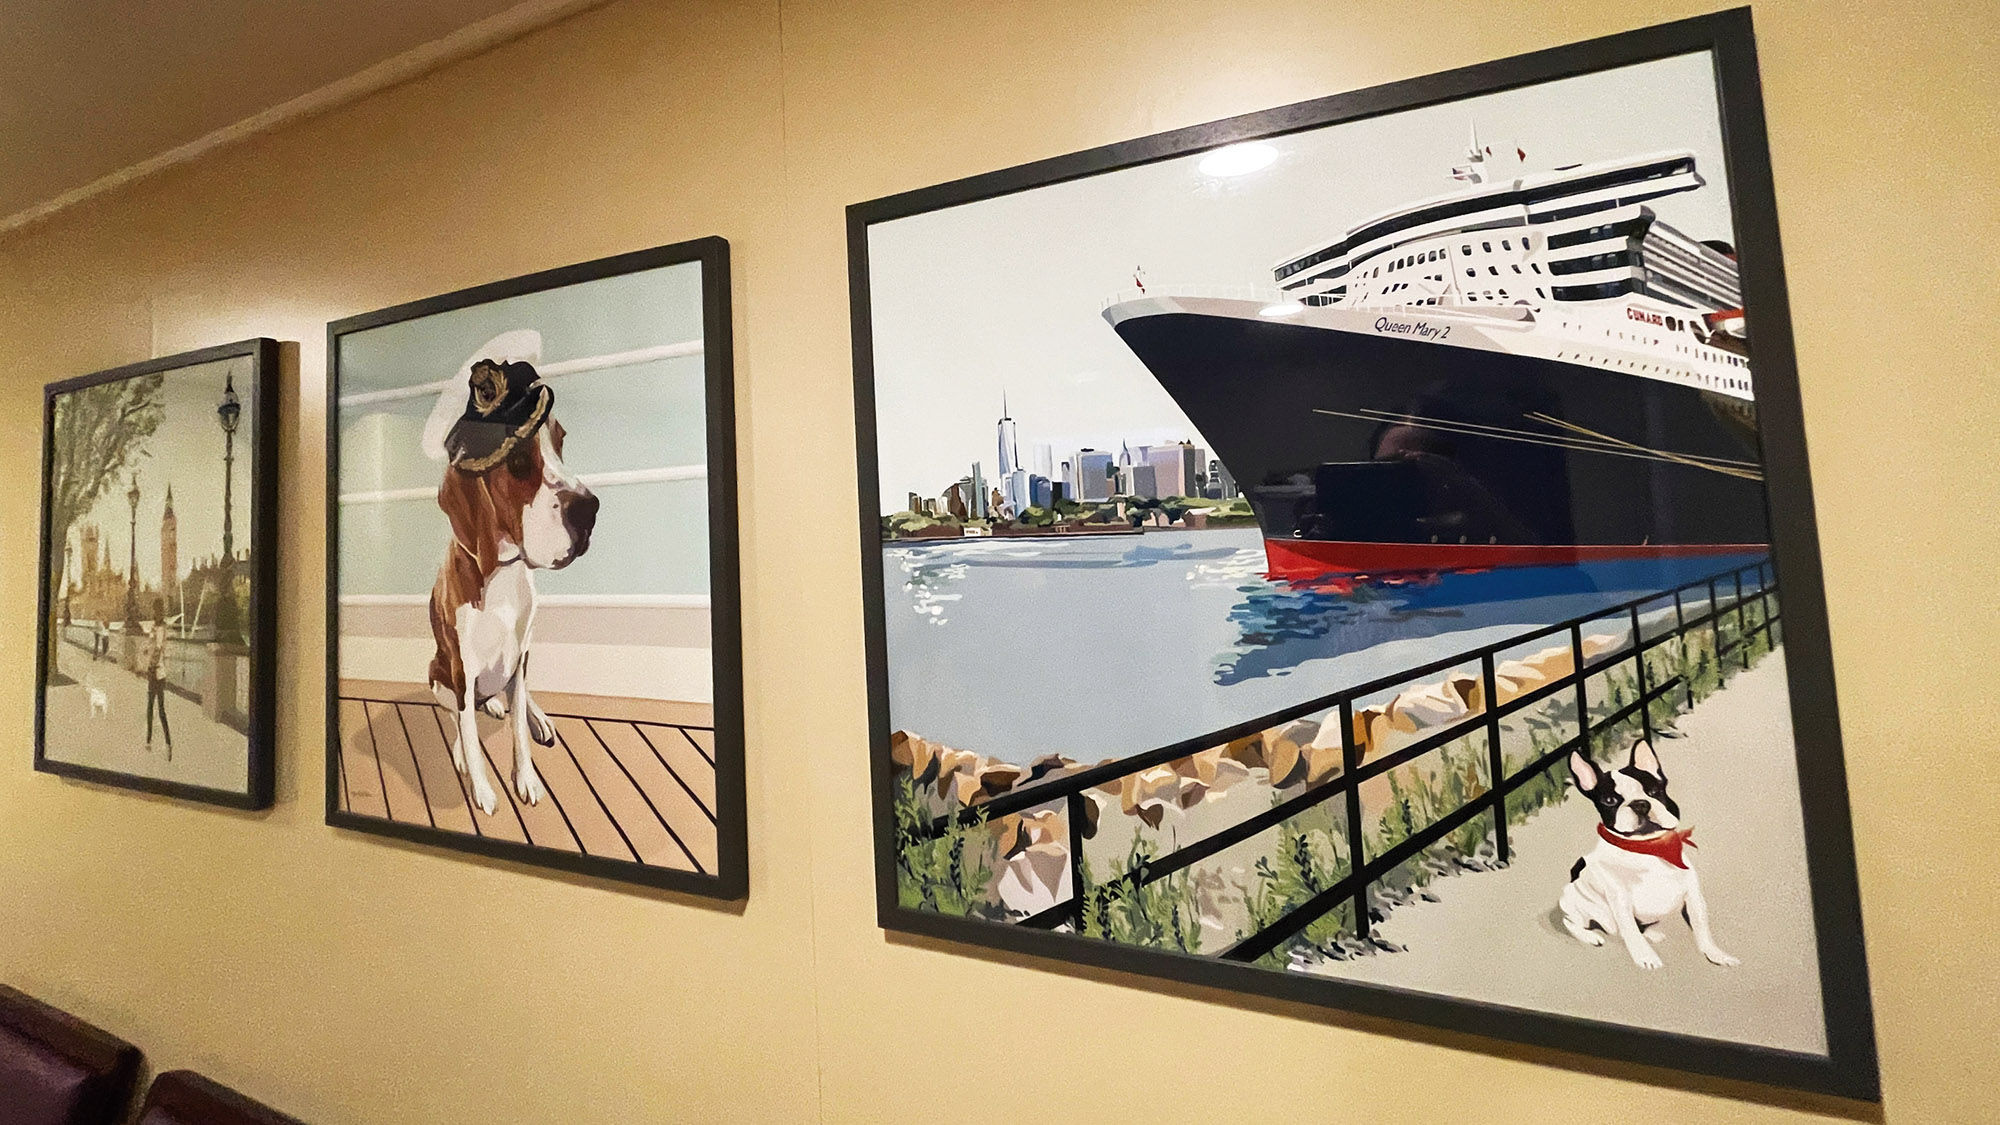 Artwork in the ship's expanded kennel.